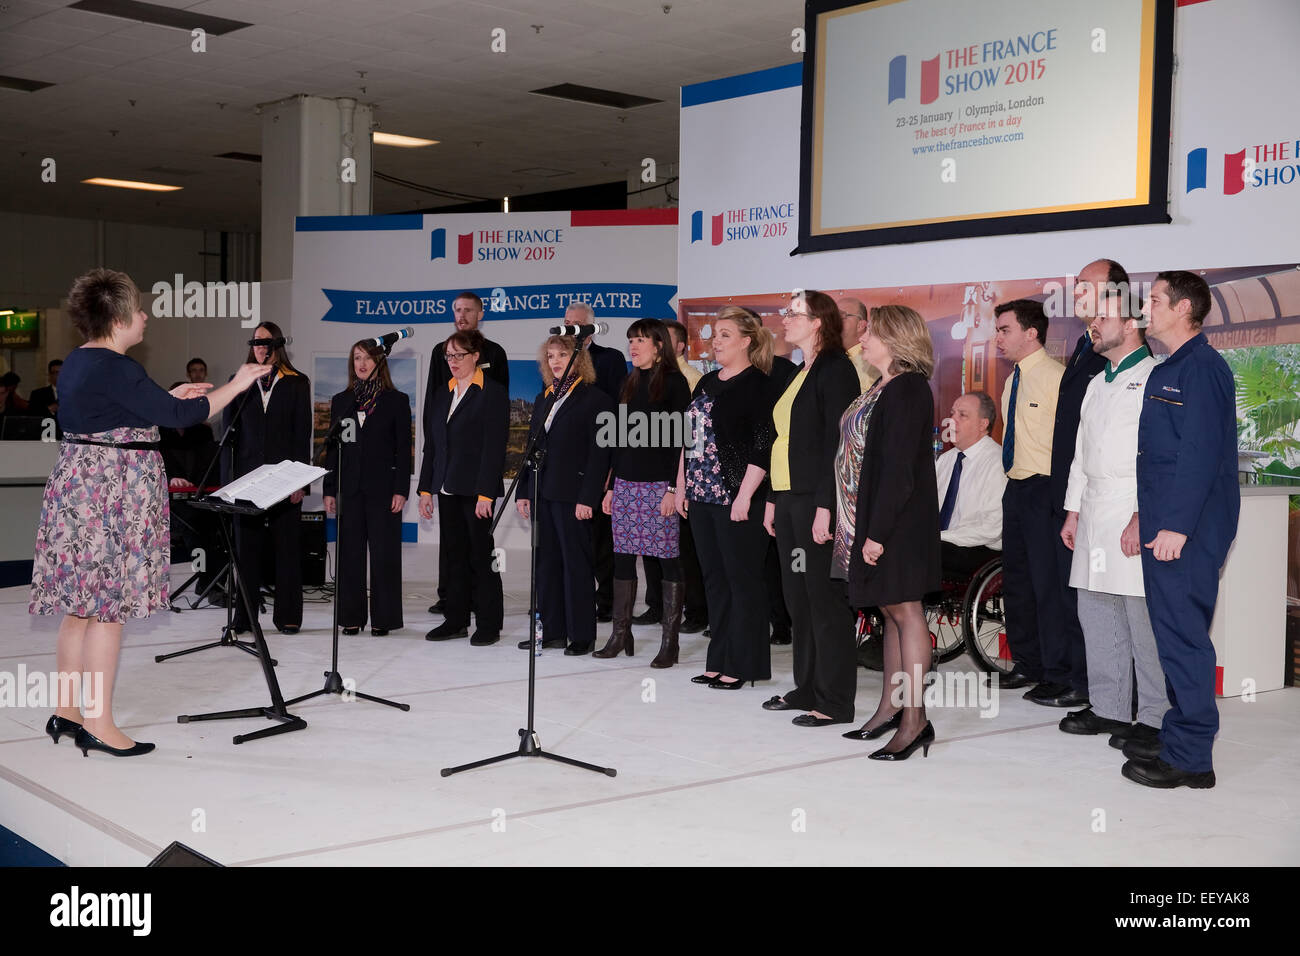 P&O staff choir sing at the France Show 2015 in Olympia London Stock Photo